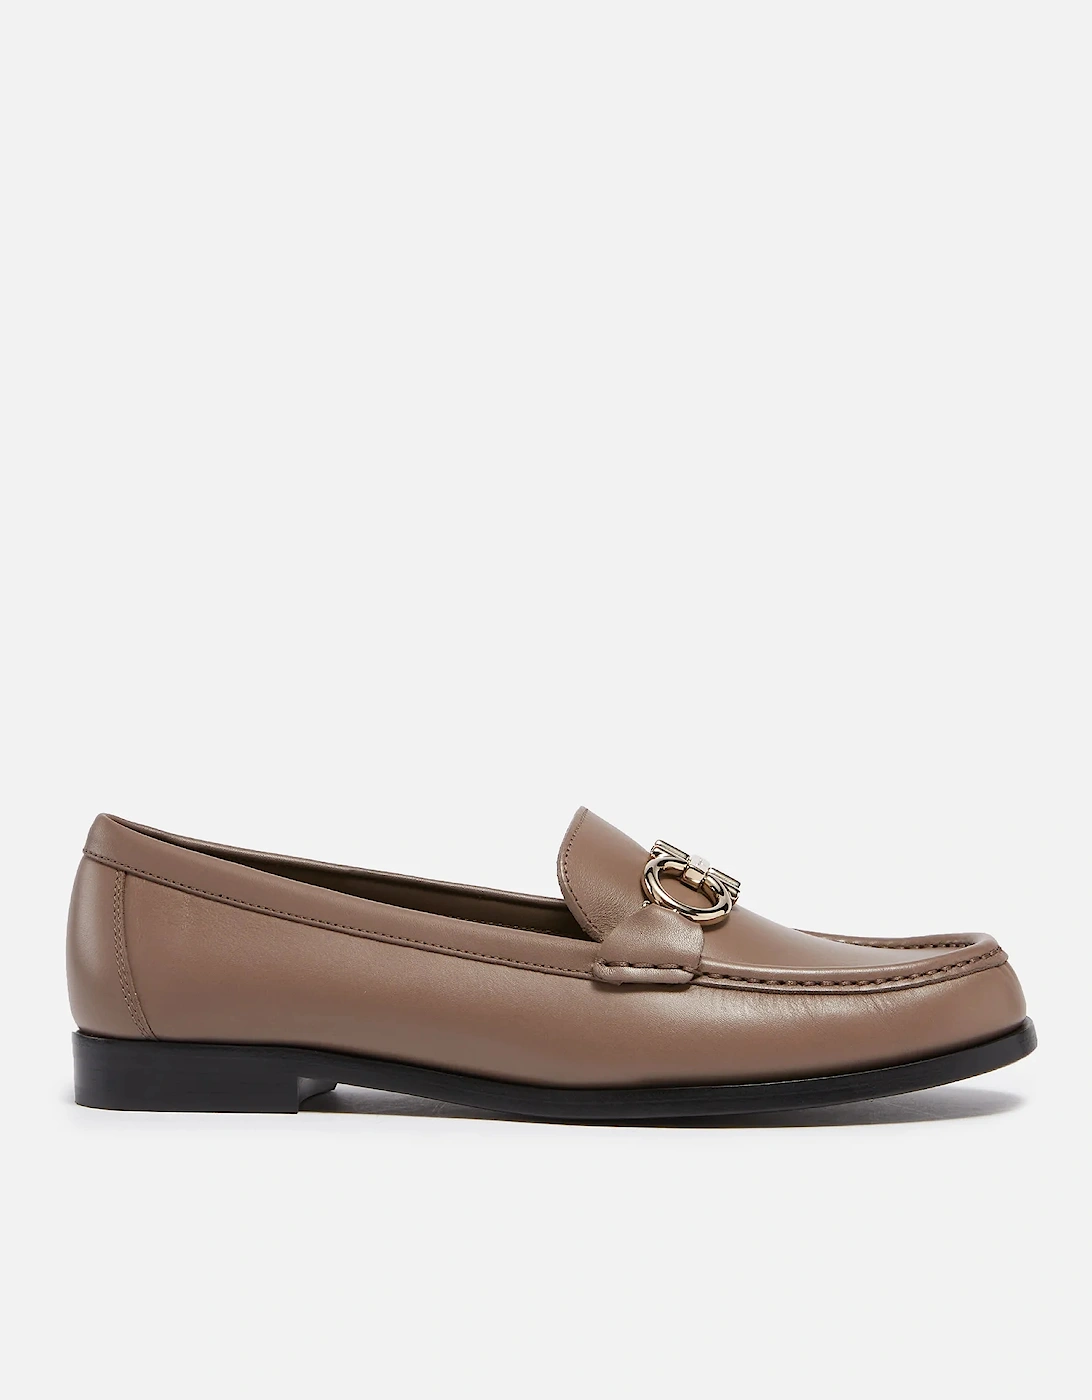 Women's Rolo Loafers - Caraway Seed - - Home - Women's Rolo Loafers - Caraway Seed, 2 of 1